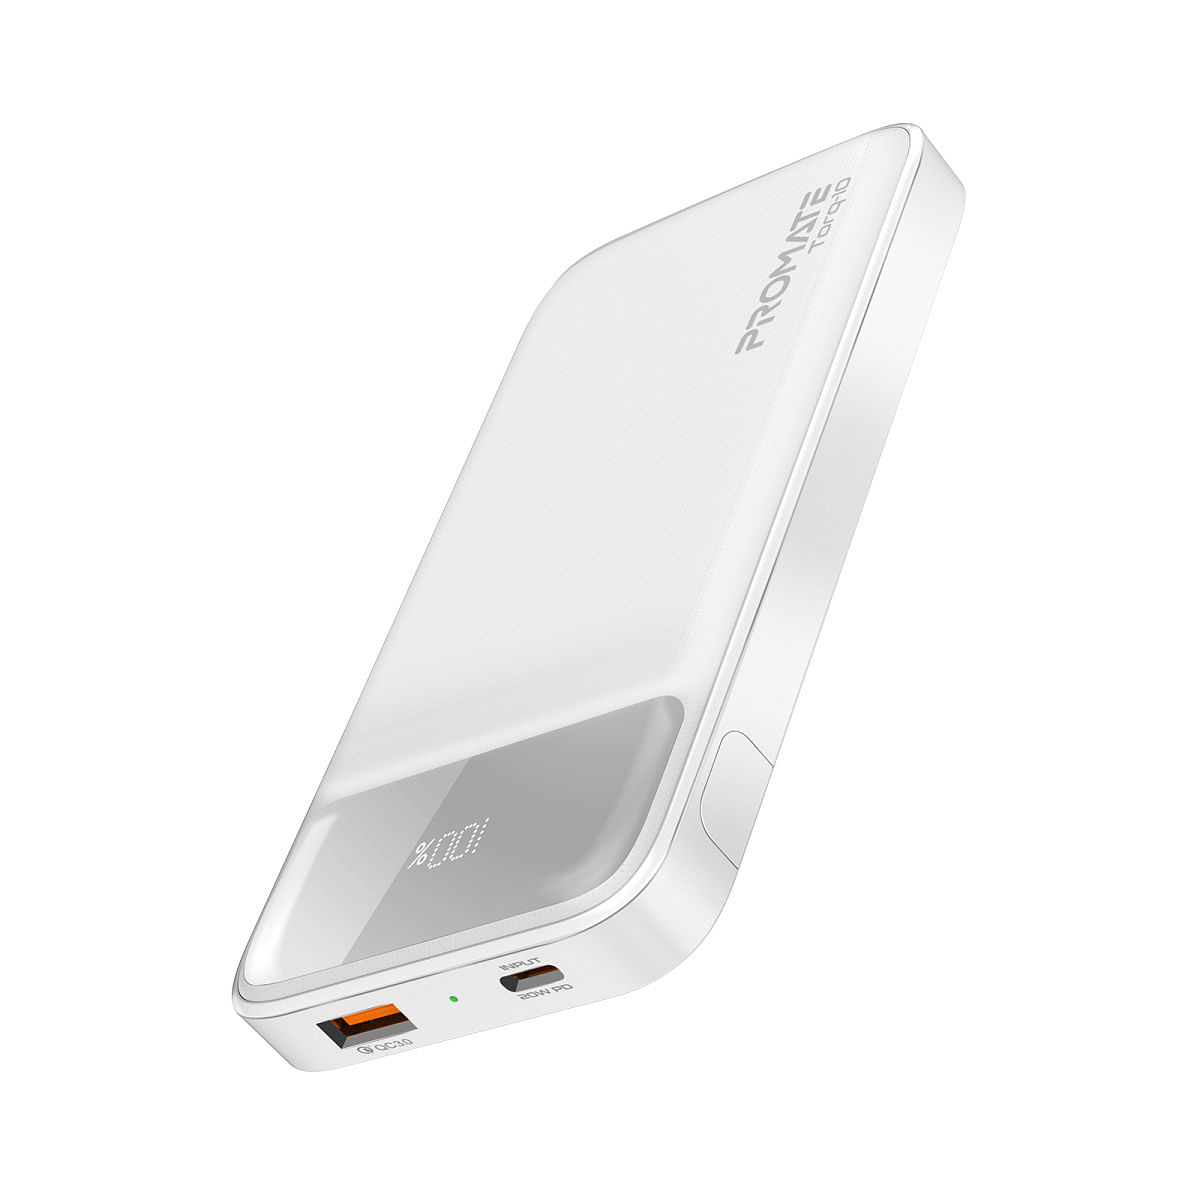 Promate Power Bank with 10000mAh Battery, Kickstand, 20W USB-C PD Port and QC 3.0 18W Port, Torq-10 White